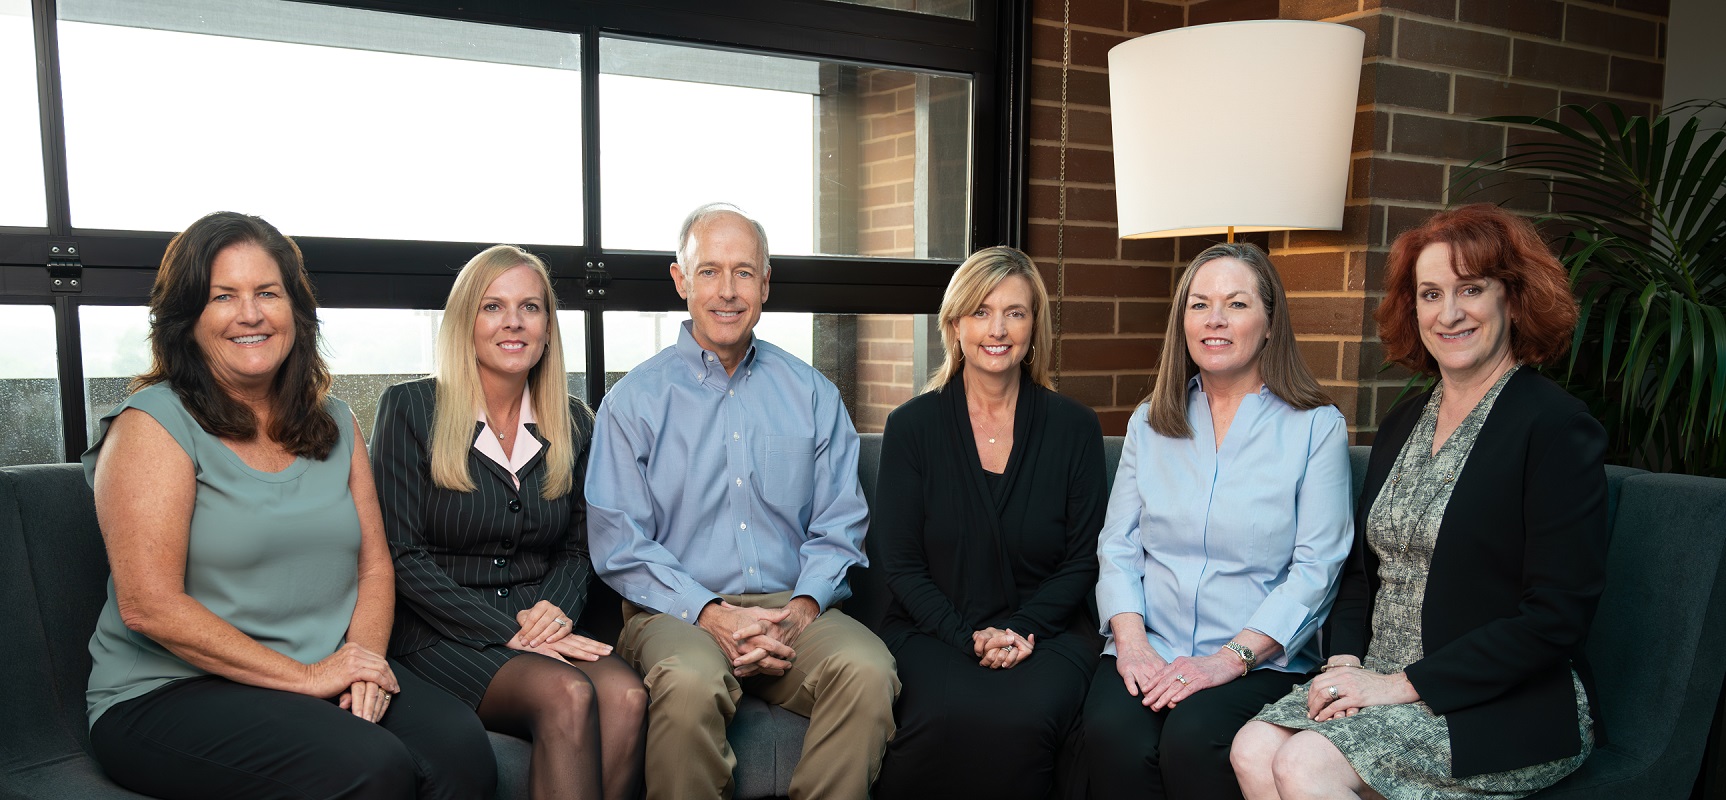 The Herring Group team of employees